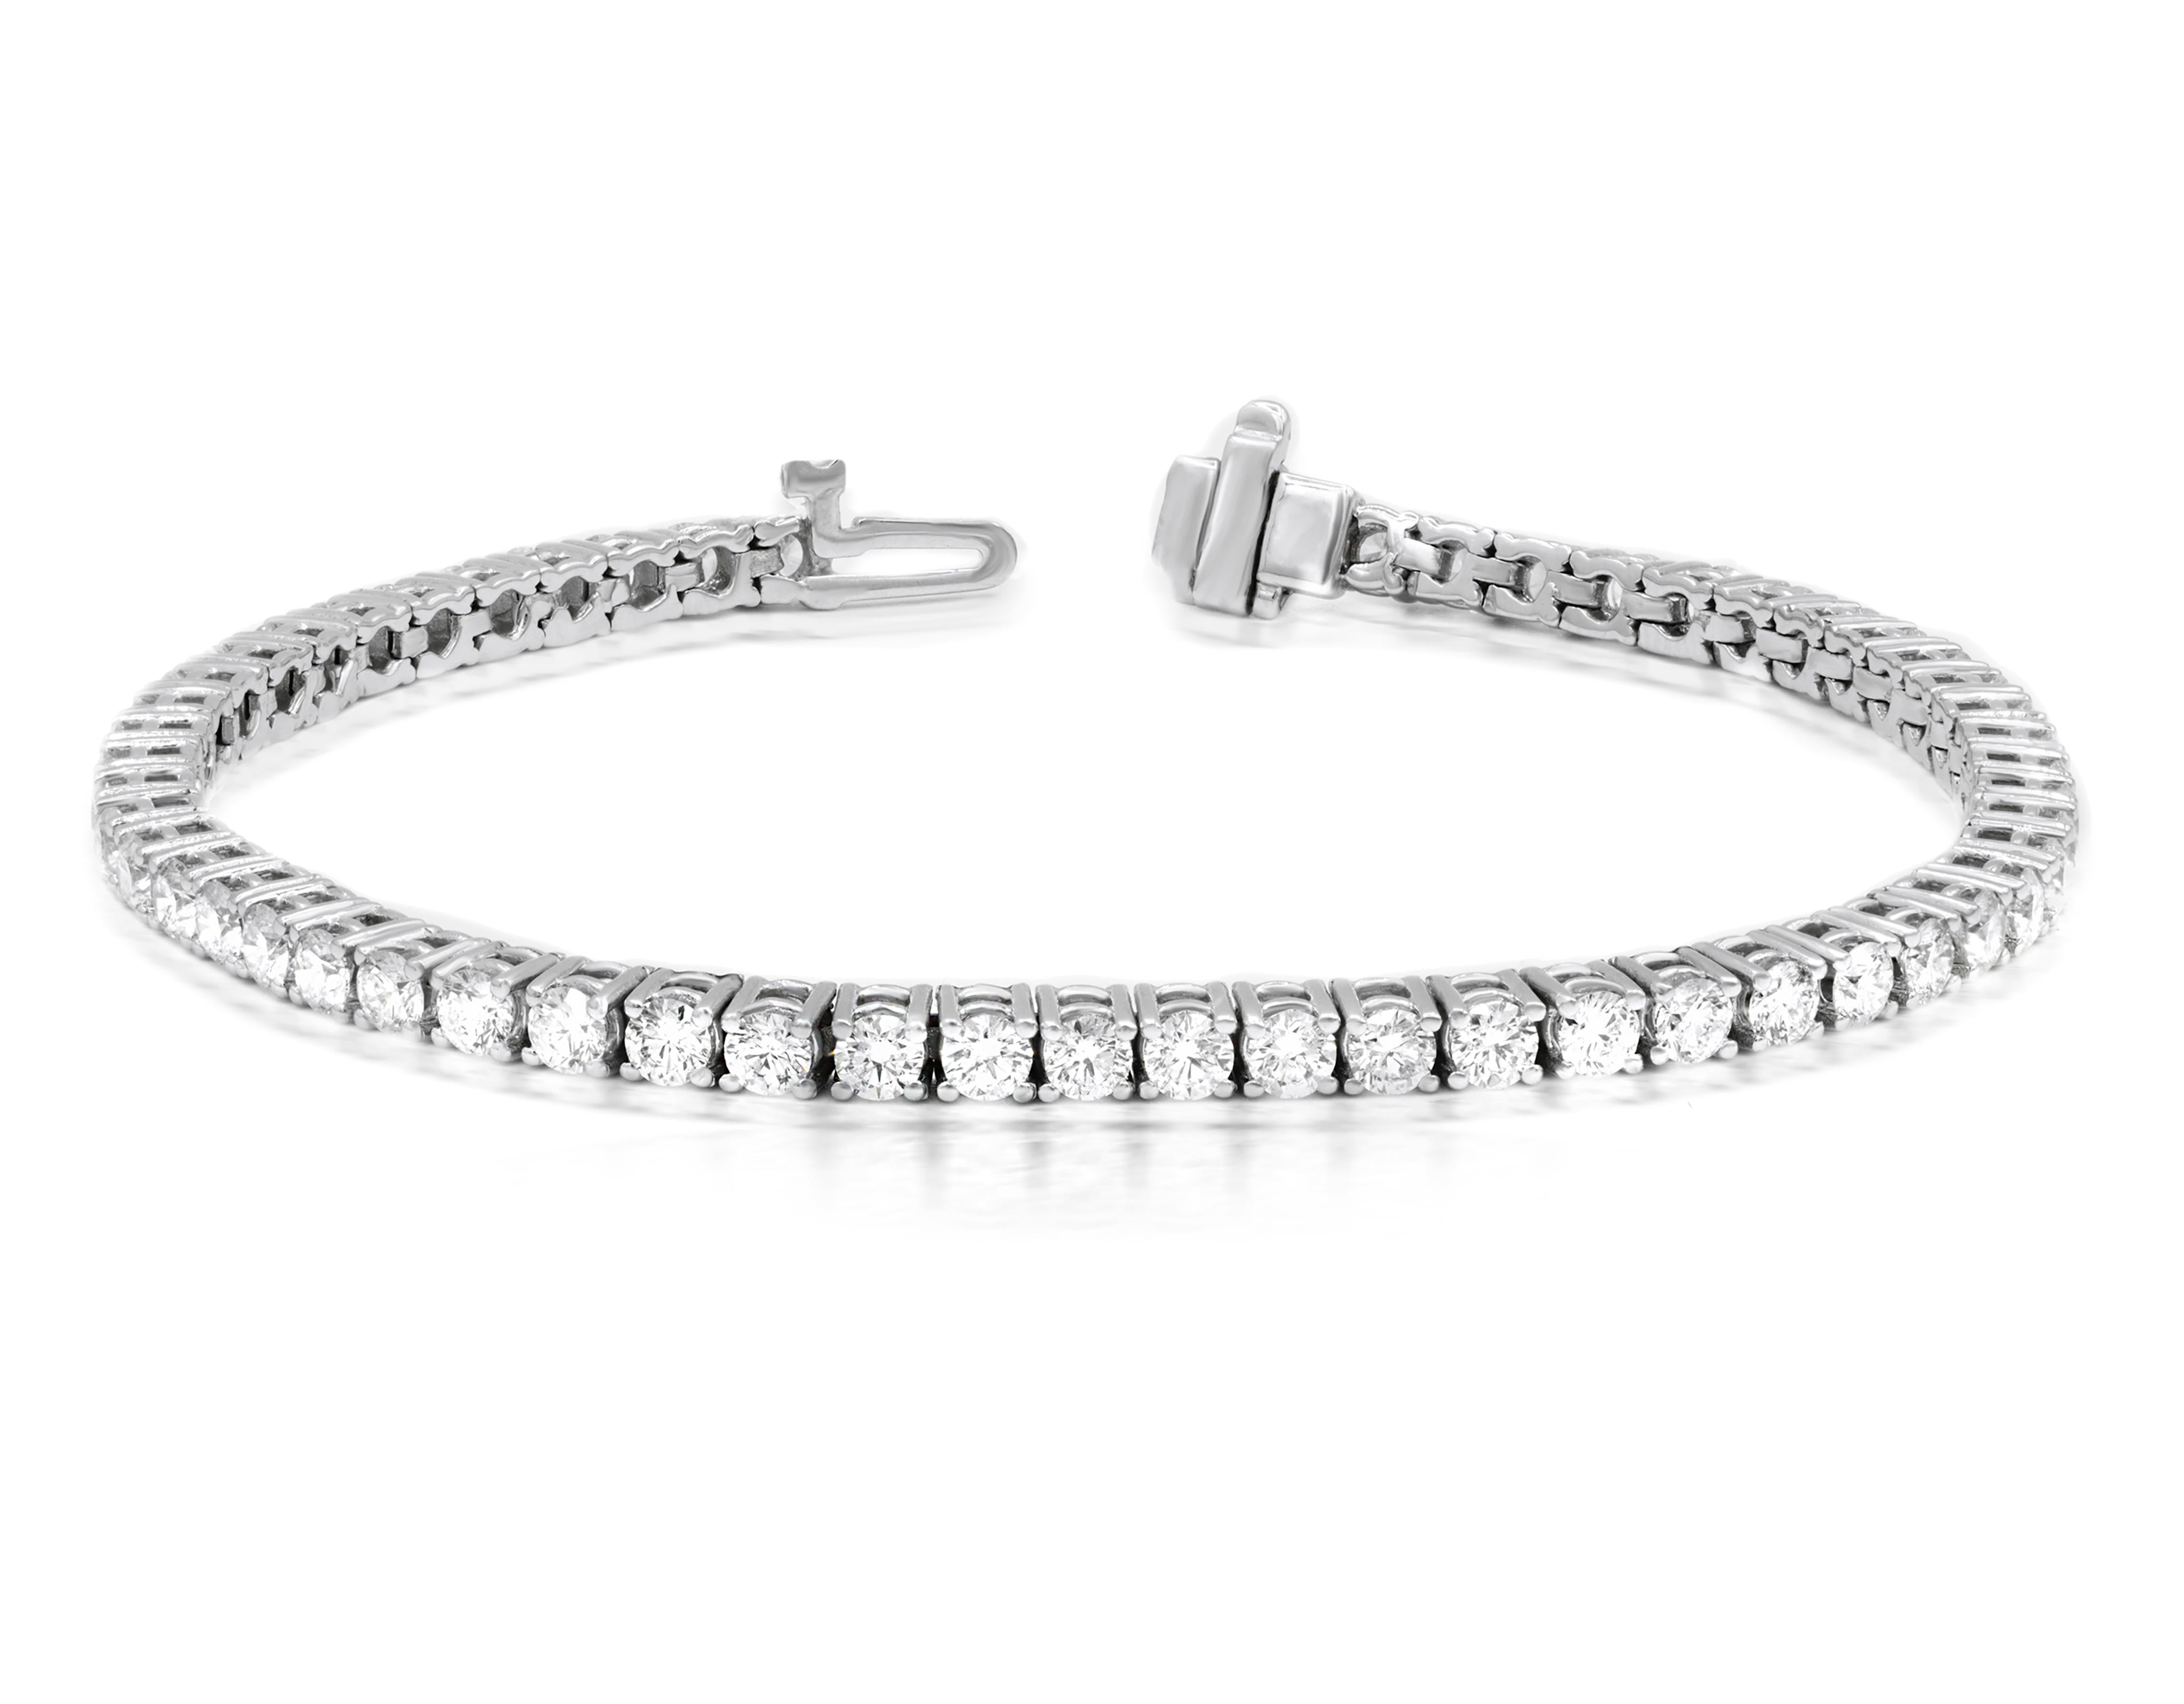 Timeless four prong diamond tennis bracelet:
- 3.00 Carats of Round Brilliant Cut Diamonds
- G-H in Color, SI I in Clarity
- 100% eye clean diamonds
